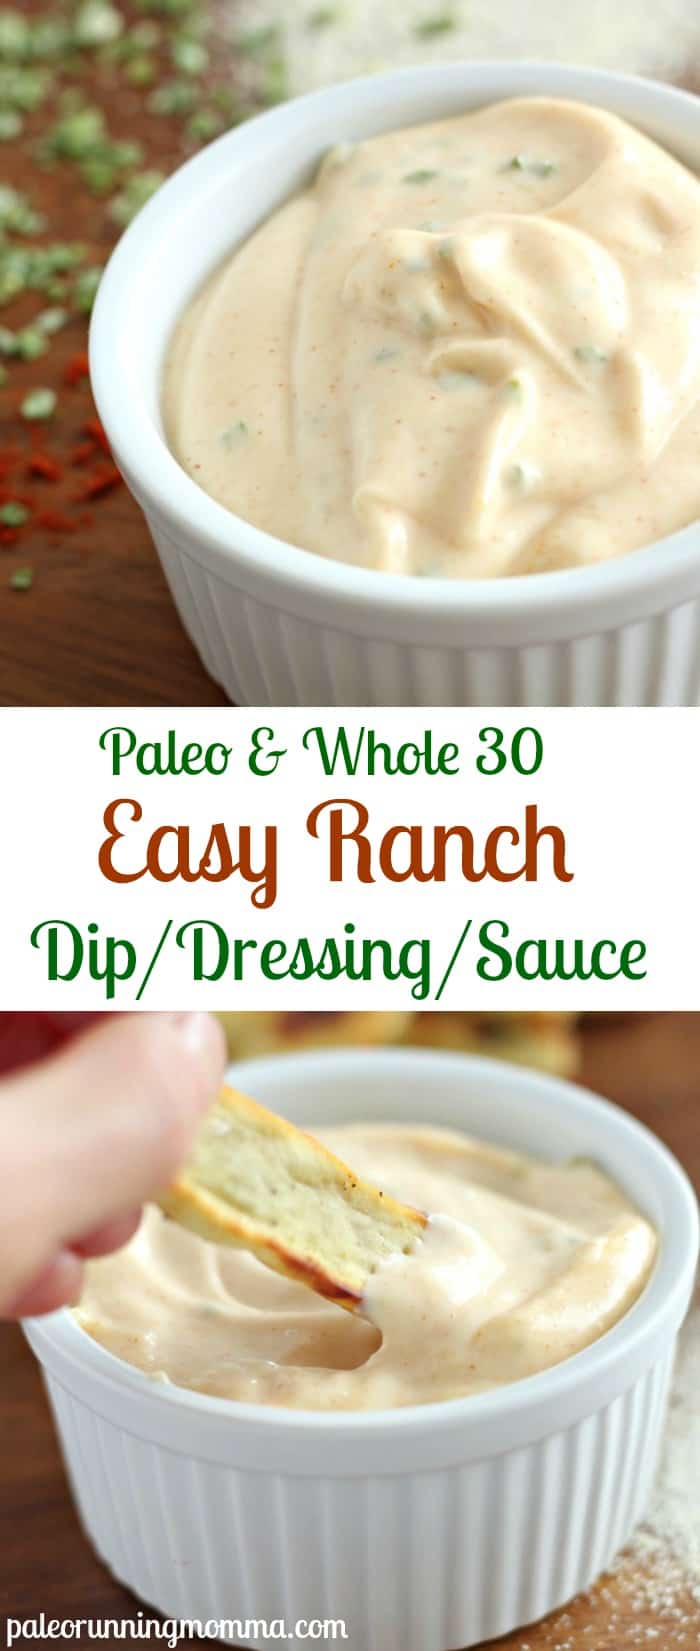 Easy ranch dip dressing or sauce! #paleo and #whole30 #dairyfree